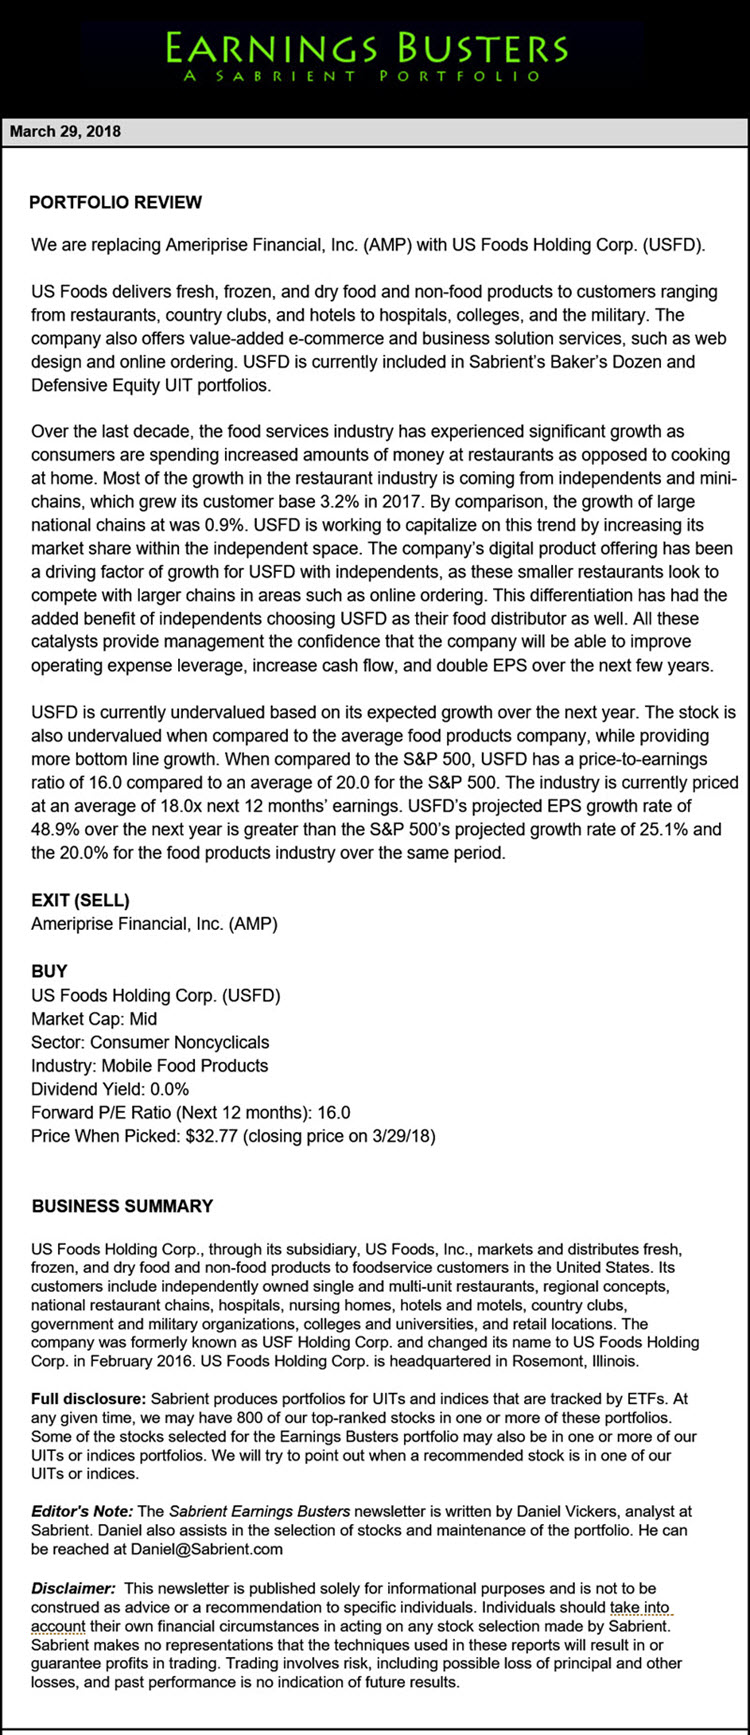 Earnings Busters Newsletter - March 29, 2018